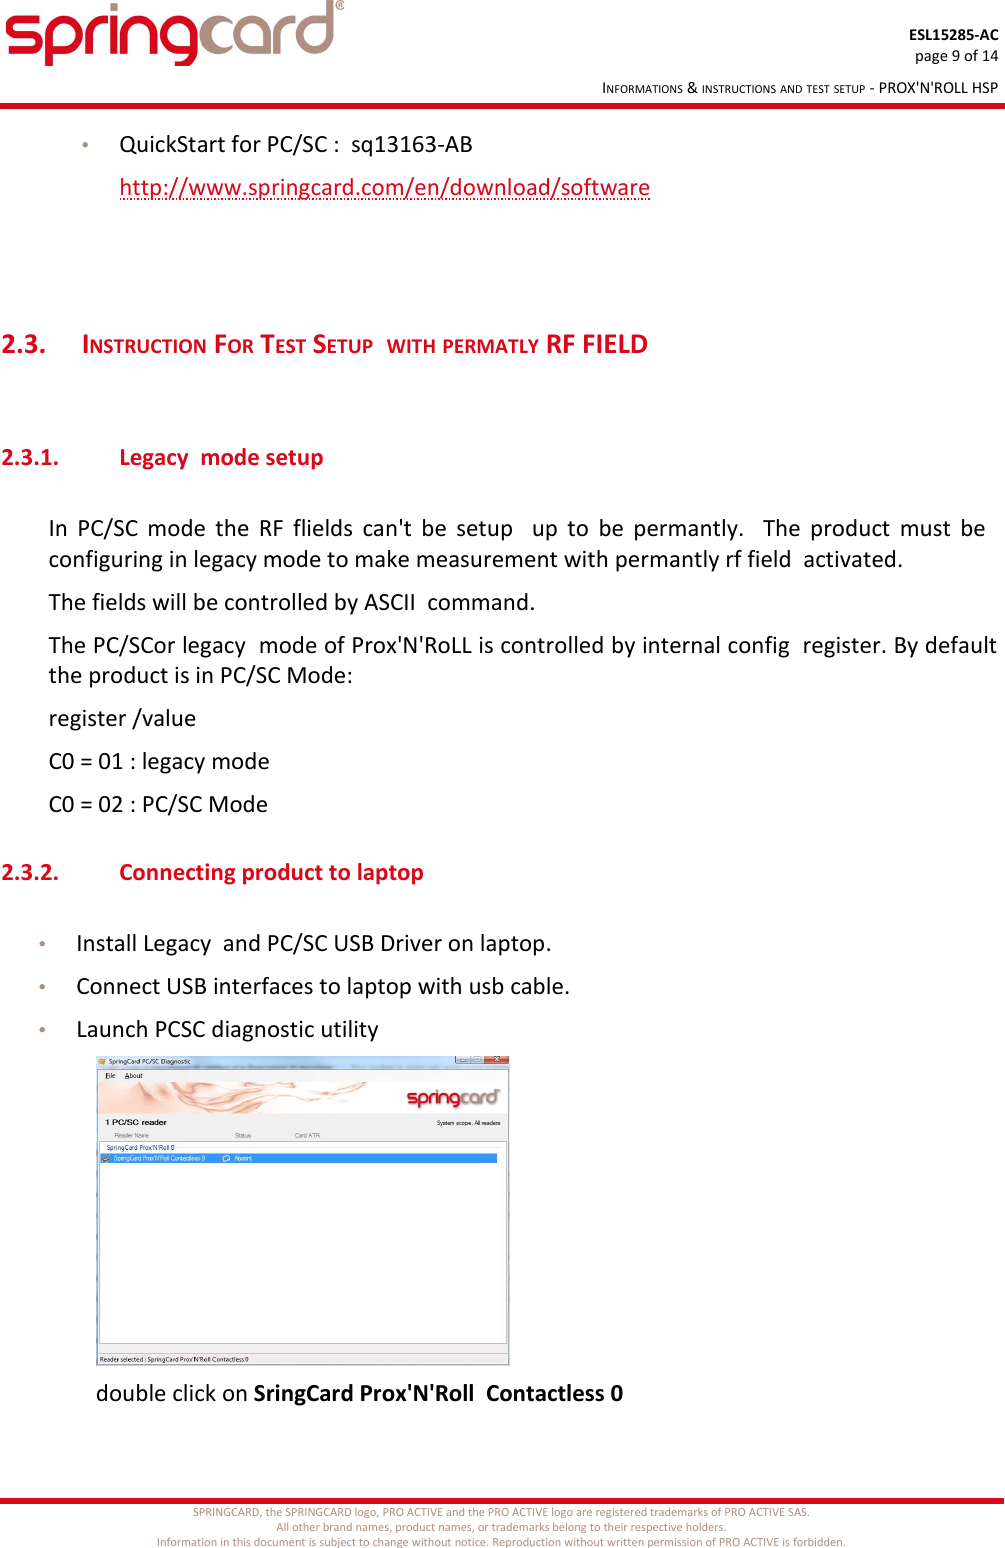 ESL15285-ACpage 9 of 14INFORMATIONS &amp; INSTRUCTIONS AND TEST SETUP - PROX&apos;N&apos;ROLL HSP•QuickStart for PC/SC :  sq13163-ABhttp://www.springcard.com/en/download/software2.3.  INSTRUCTION FOR TEST SETUP  WITH PERMATLY RF FIELD 2.3.1. Legacy  mode setupIn PC/SC mode the RF flields can&apos;t be setup   up to be permantly.   The product must be   configuring in legacy mode to make measurement with permantly rf field  activated.The fields will be controlled by ASCII  command.The PC/SCor legacy  mode of Prox&apos;N&apos;RoLL is controlled by internal config  register. By default the product is in PC/SC Mode:register /valueC0 = 01 : legacy modeC0 = 02 : PC/SC Mode2.3.2. Connecting product to laptop•Install Legacy  and PC/SC USB Driver on laptop.•Connect USB interfaces to laptop with usb cable.•Launch PCSC diagnostic utilitydouble click on SringCard Prox&apos;N&apos;Roll  Contactless 0SPRINGCARD, the SPRINGCARD logo, PRO ACTIVE and the PRO ACTIVE logo are registered trademarks of PRO ACTIVE SAS.All other brand names, product names, or trademarks belong to their respective holders.Information in this document is subject to change without notice. Reproduction without written permission of PRO ACTIVE is forbidden.